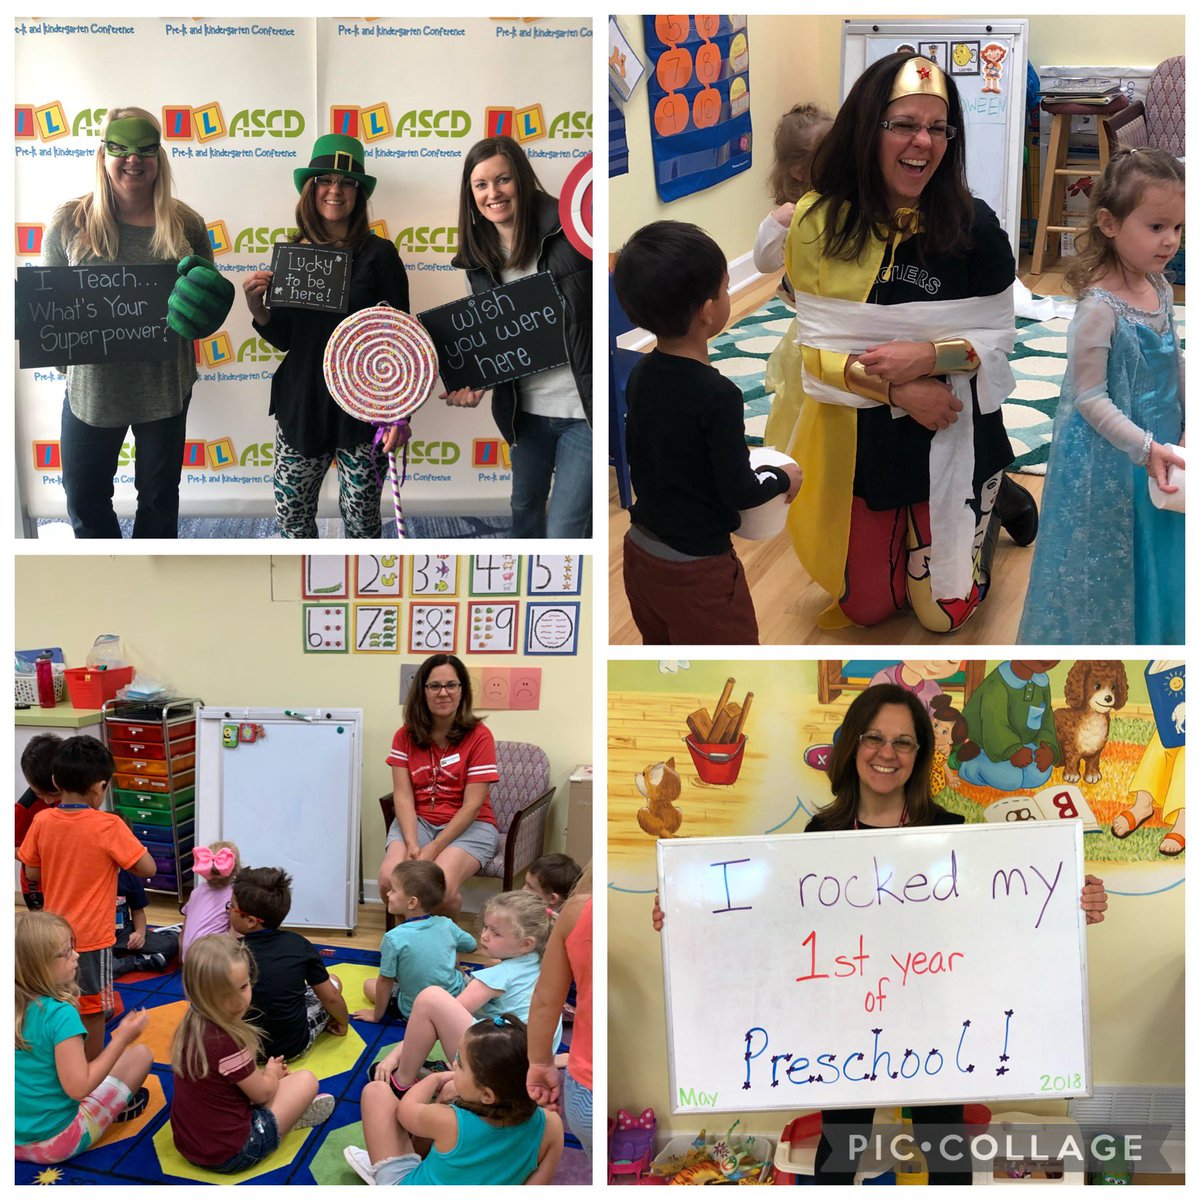 Thank you Ms Jenny for the kindness and creativity you bring to your classroom!  We appreciate your hard work, contribution, & creative curriculum ideas!  Thank you for helping us grow Precious Tots!Congratulations on your 5 years with us! #5yearanniversary #PreciousTotsPreschool https://t.co/T0Z5Xnf8Uk